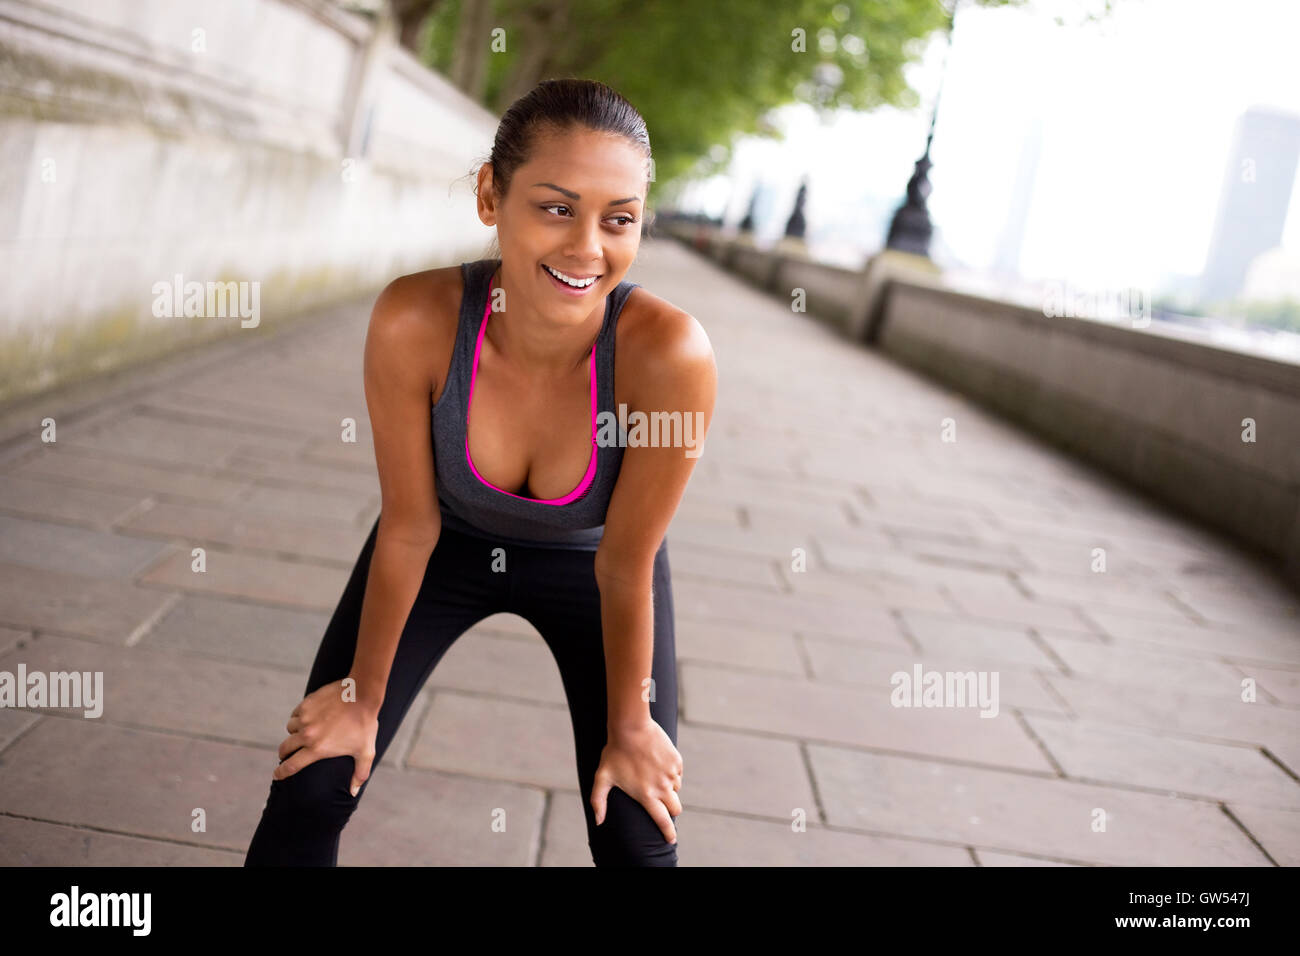 happy young woman out exercising Stock Photo